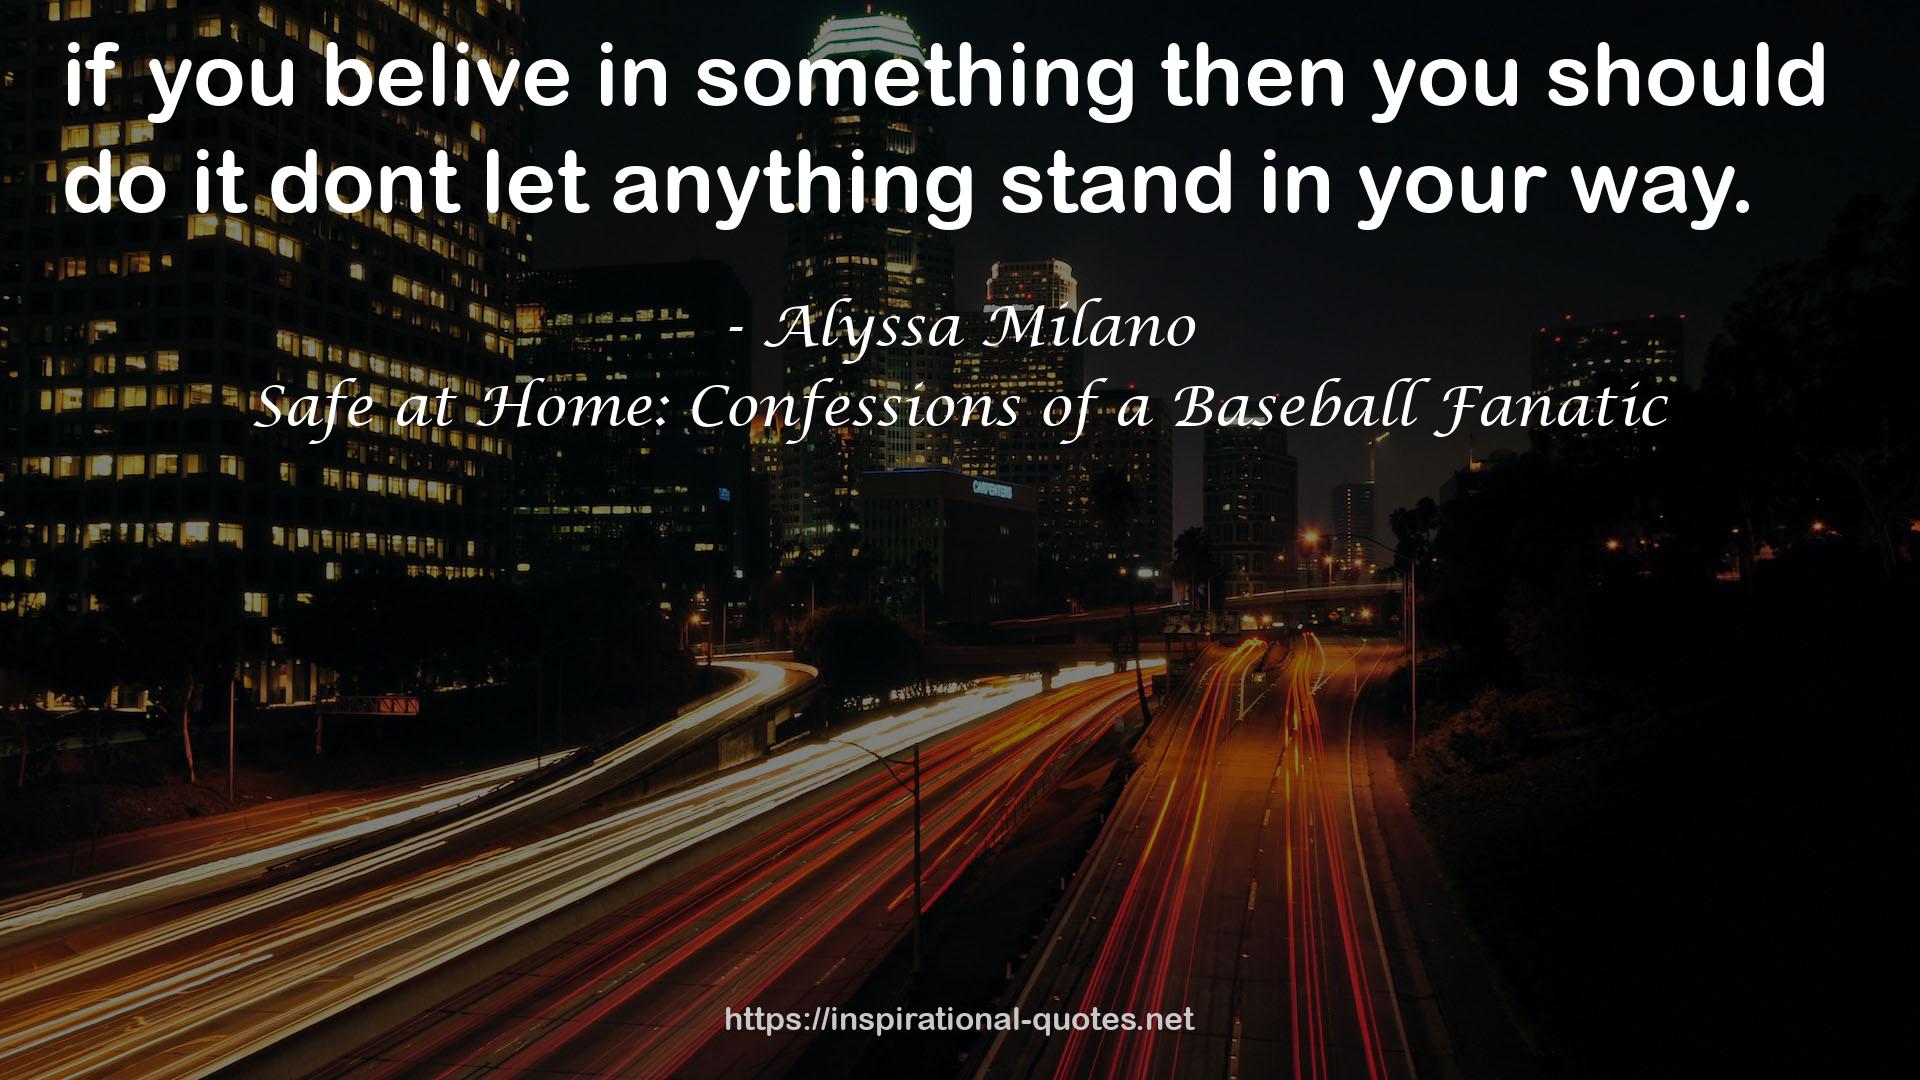 Safe at Home: Confessions of a Baseball Fanatic QUOTES